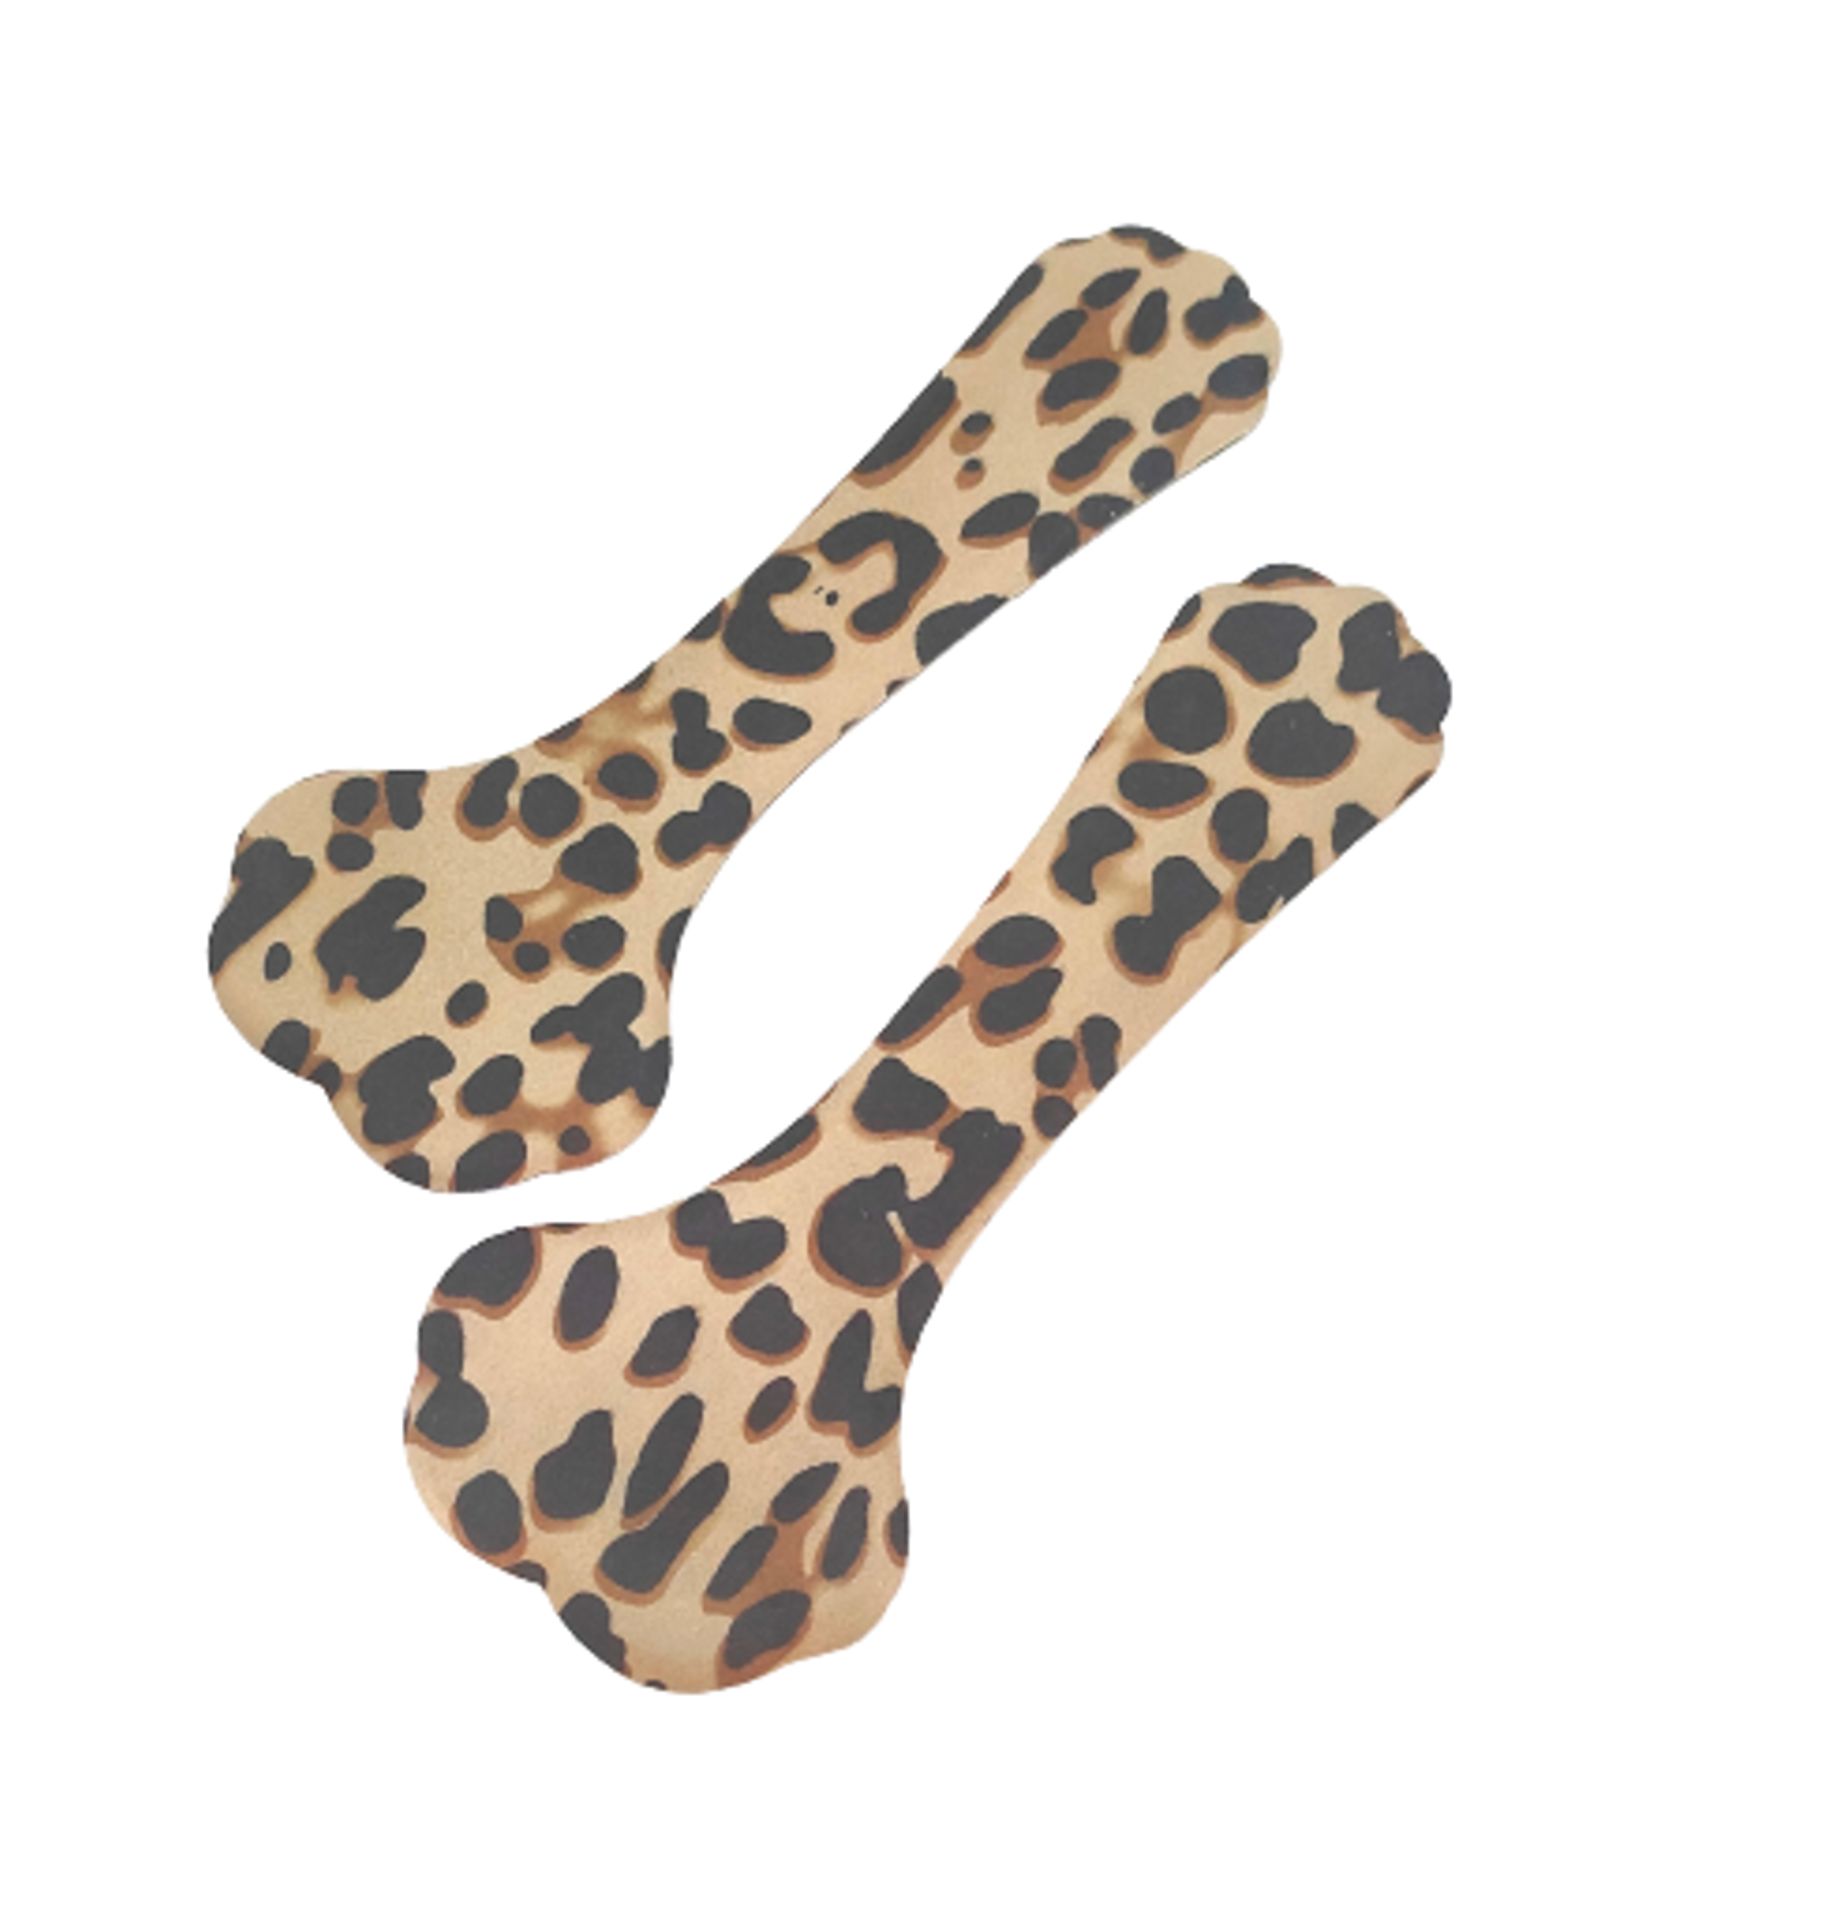 6,048 X NEW FOOTTREATS GEL INSOLE ANIMAL PRINT - Image 2 of 3